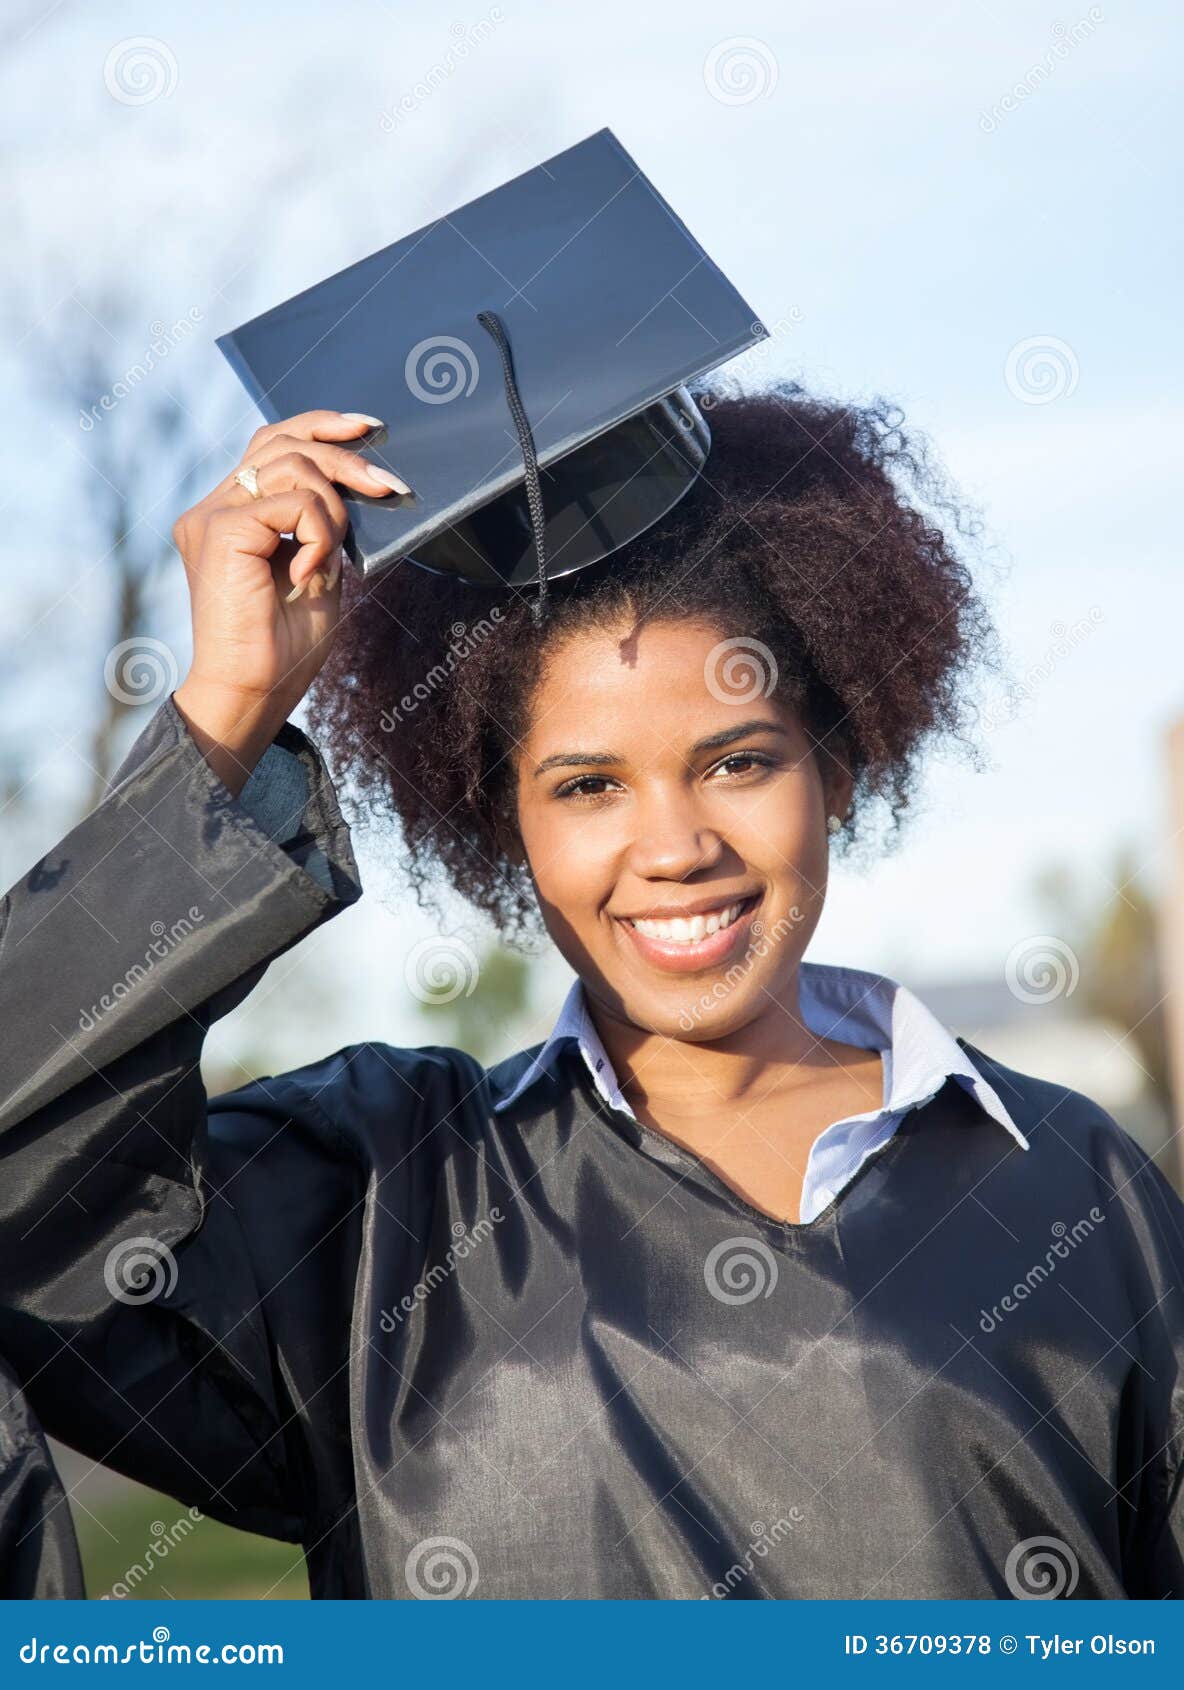 Asian Kindergarten Kid In Graduation Gown And Mortarboard Stock Photo,  Picture and Royalty Free Image. Image 44248619.